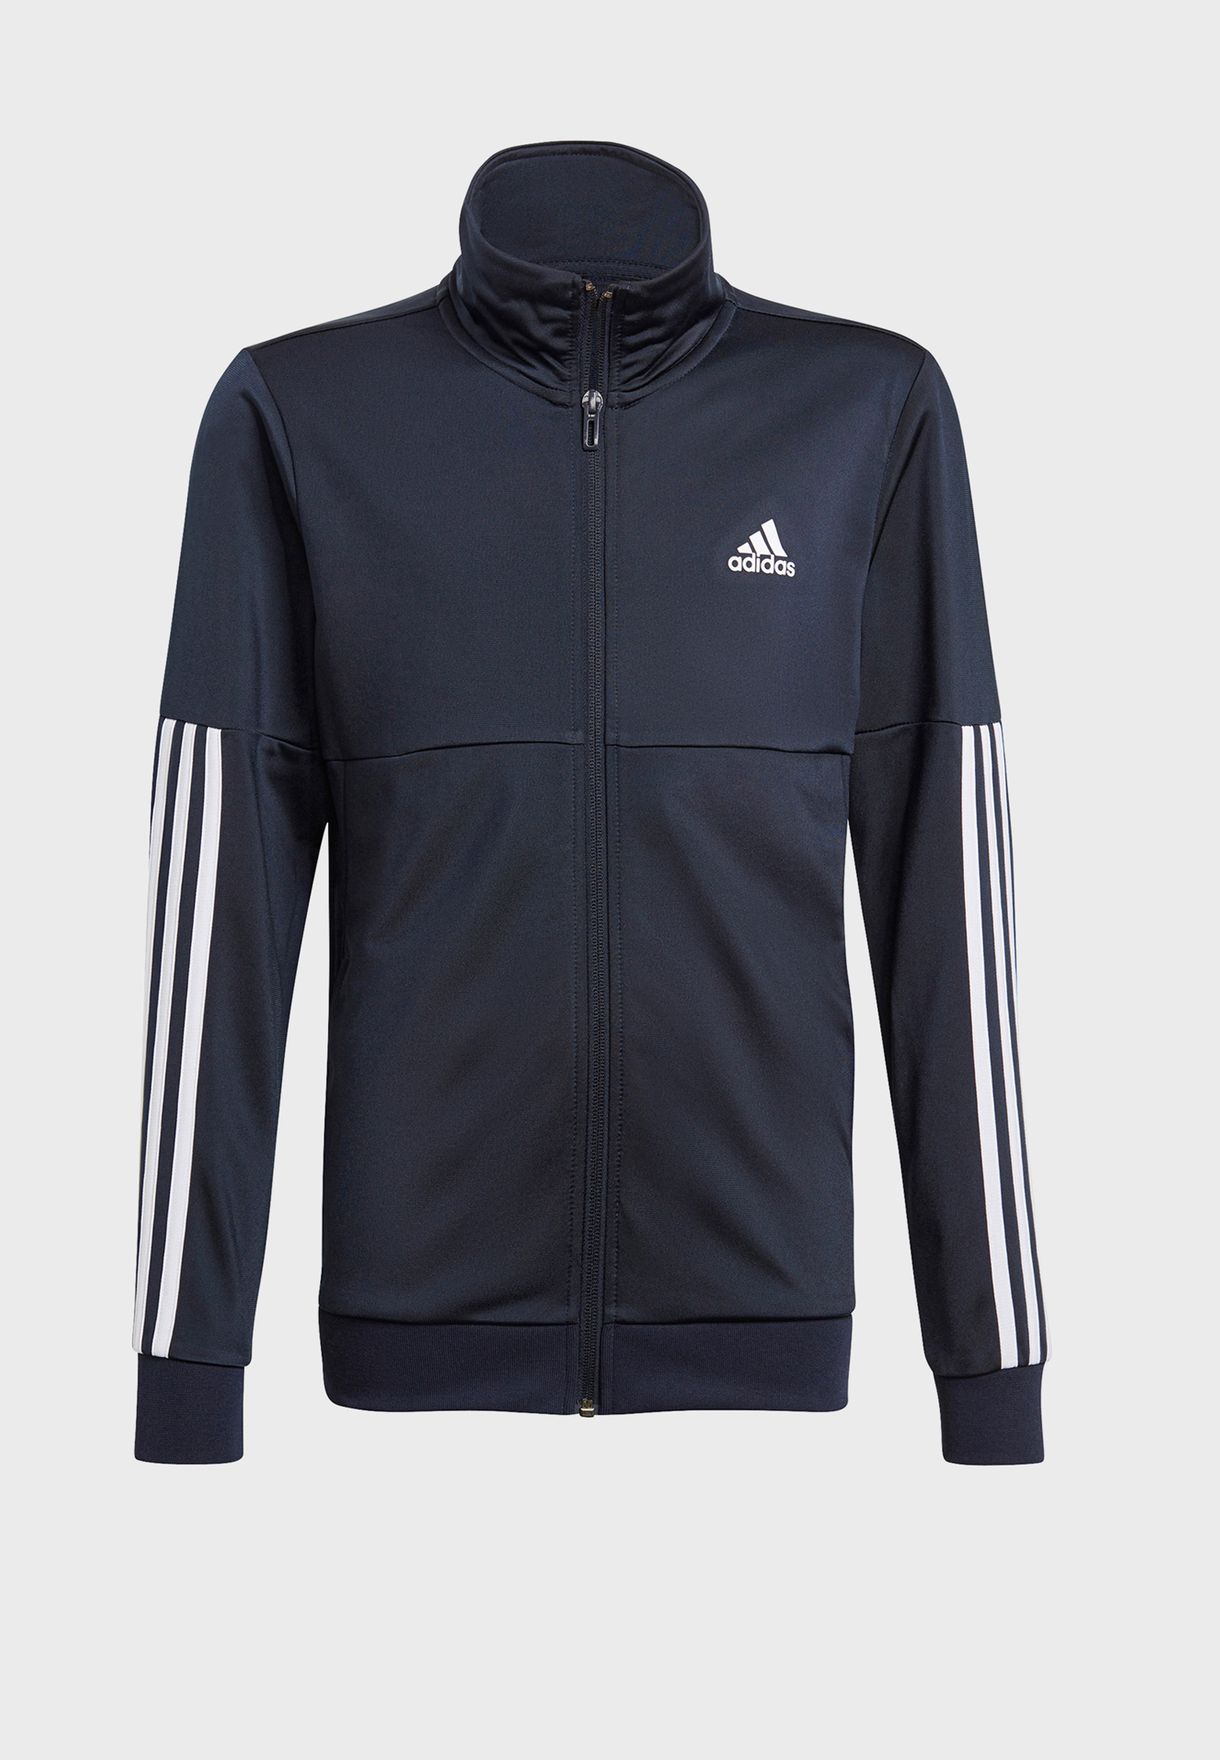 Youth 3 Stripe Team Tracksuit